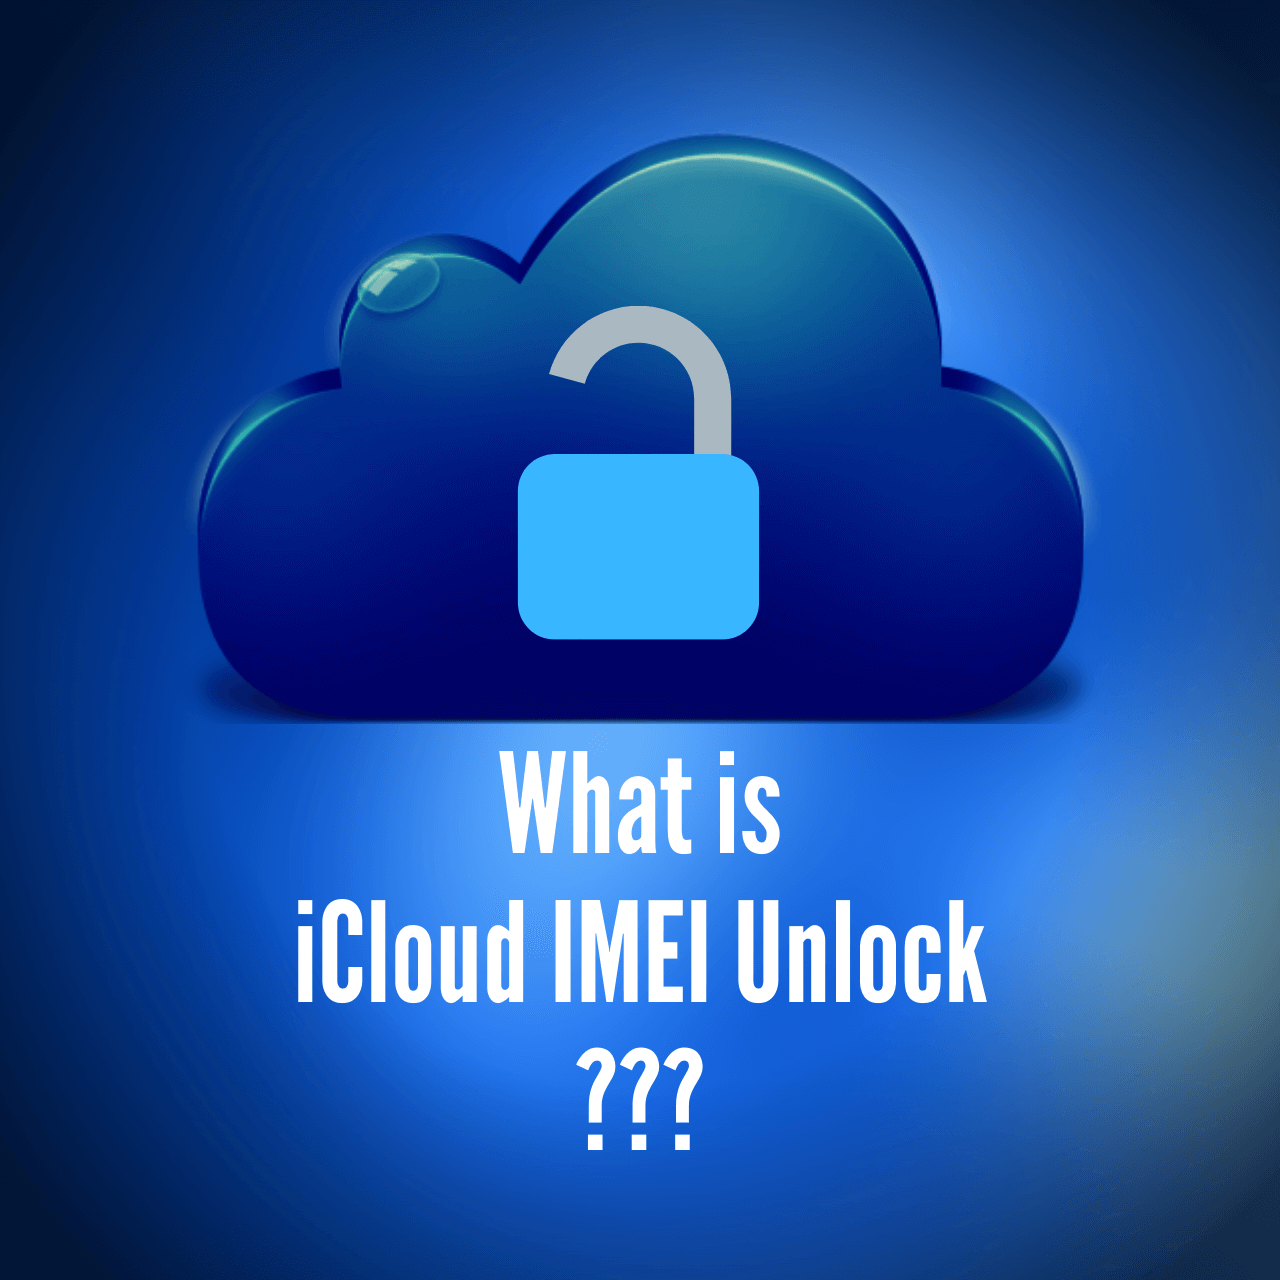 Imei Icloud Unlock This Is How To Bypass Activation Lock At Ease